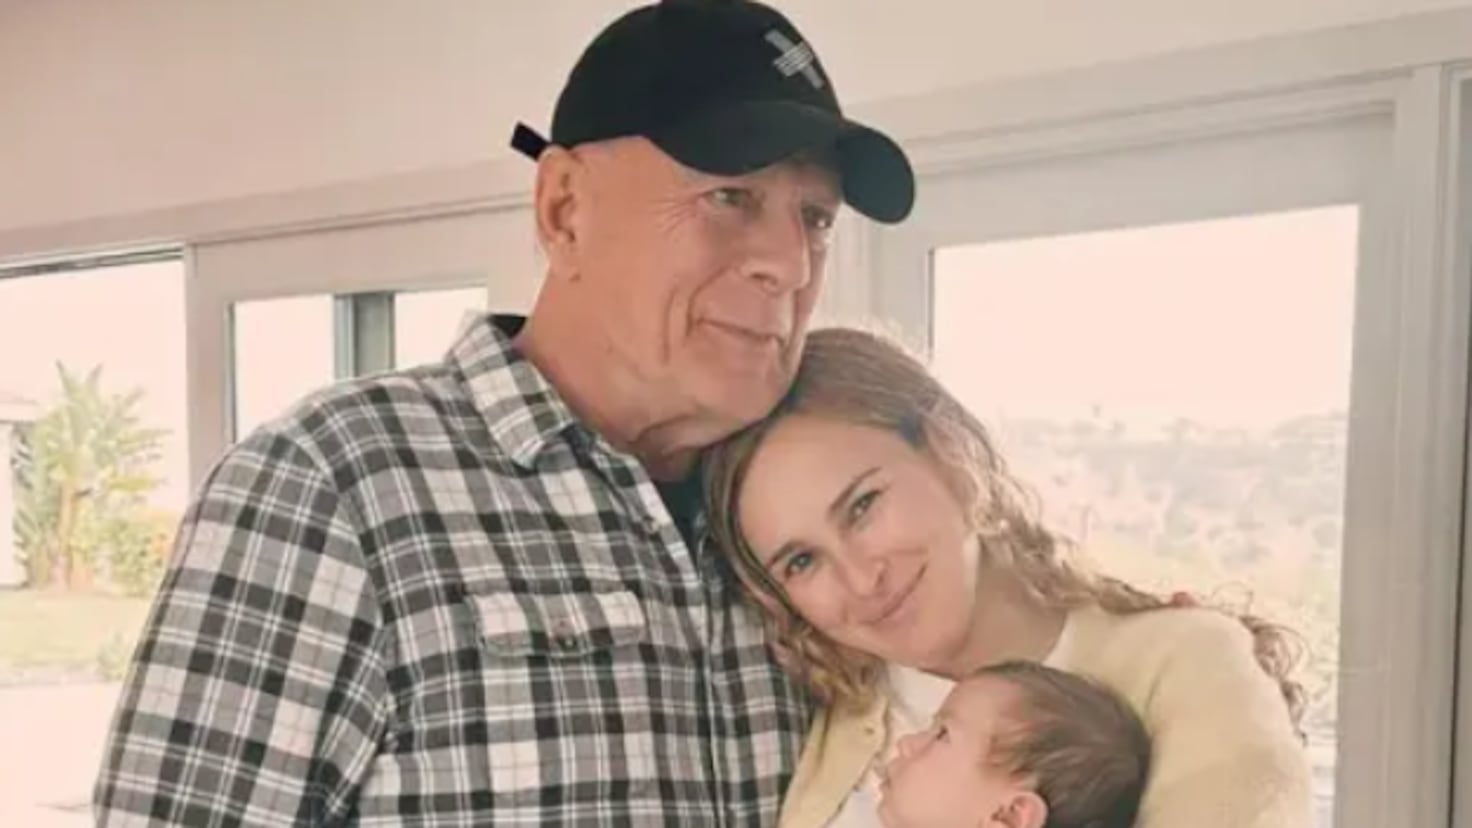 Bruce Willis' daughter gives the latest health report on the actor: He is doing well
